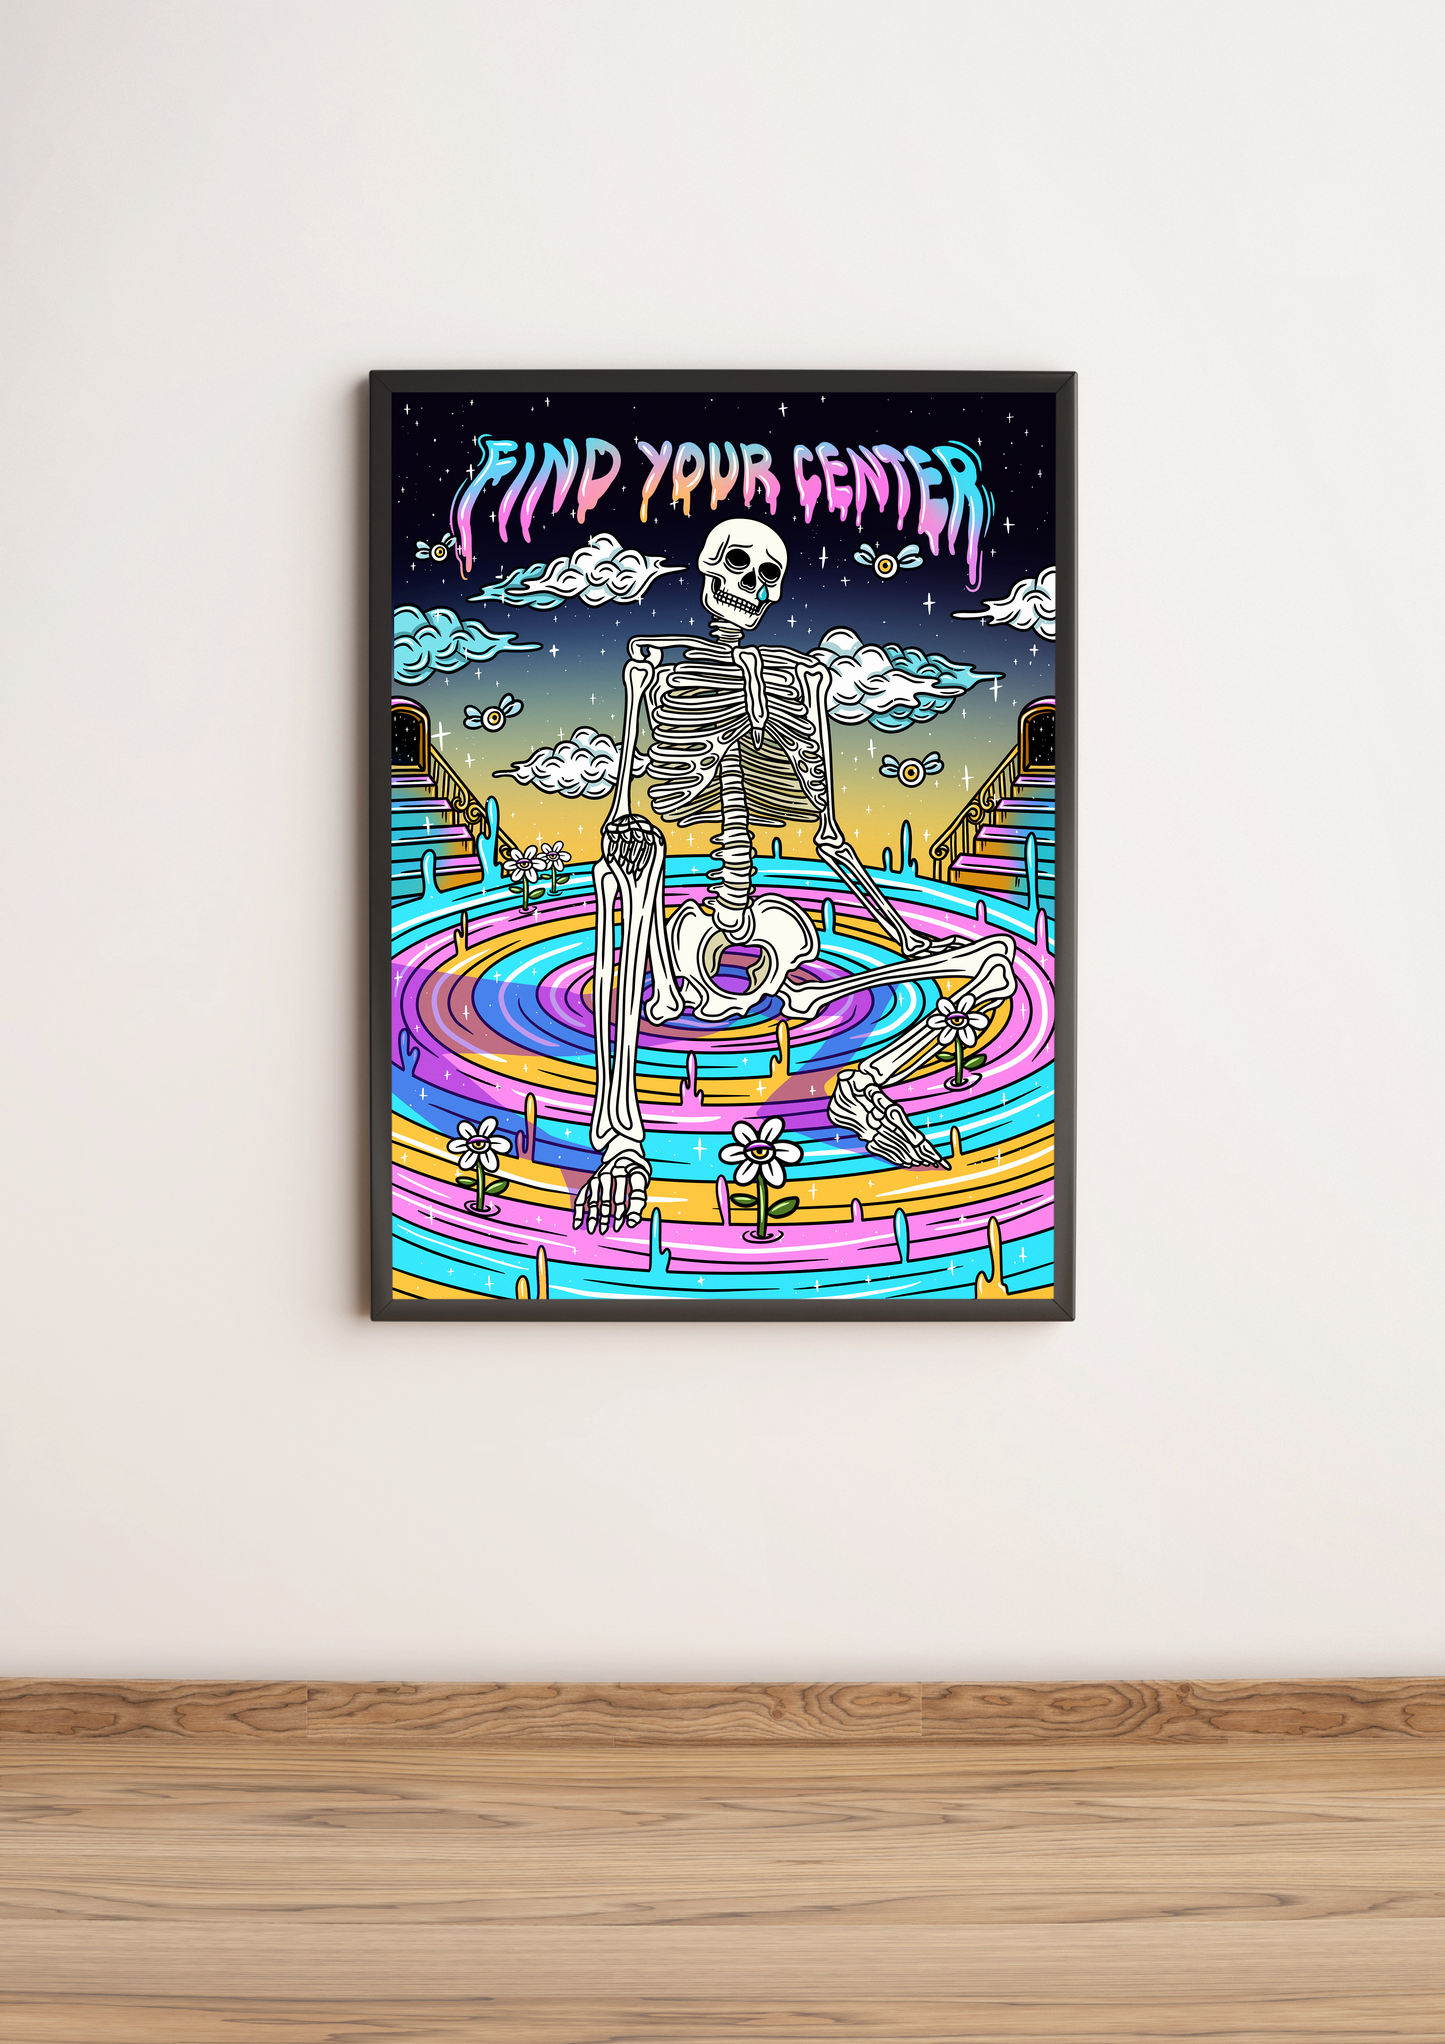 Find Your Center Art Print Wall Poster